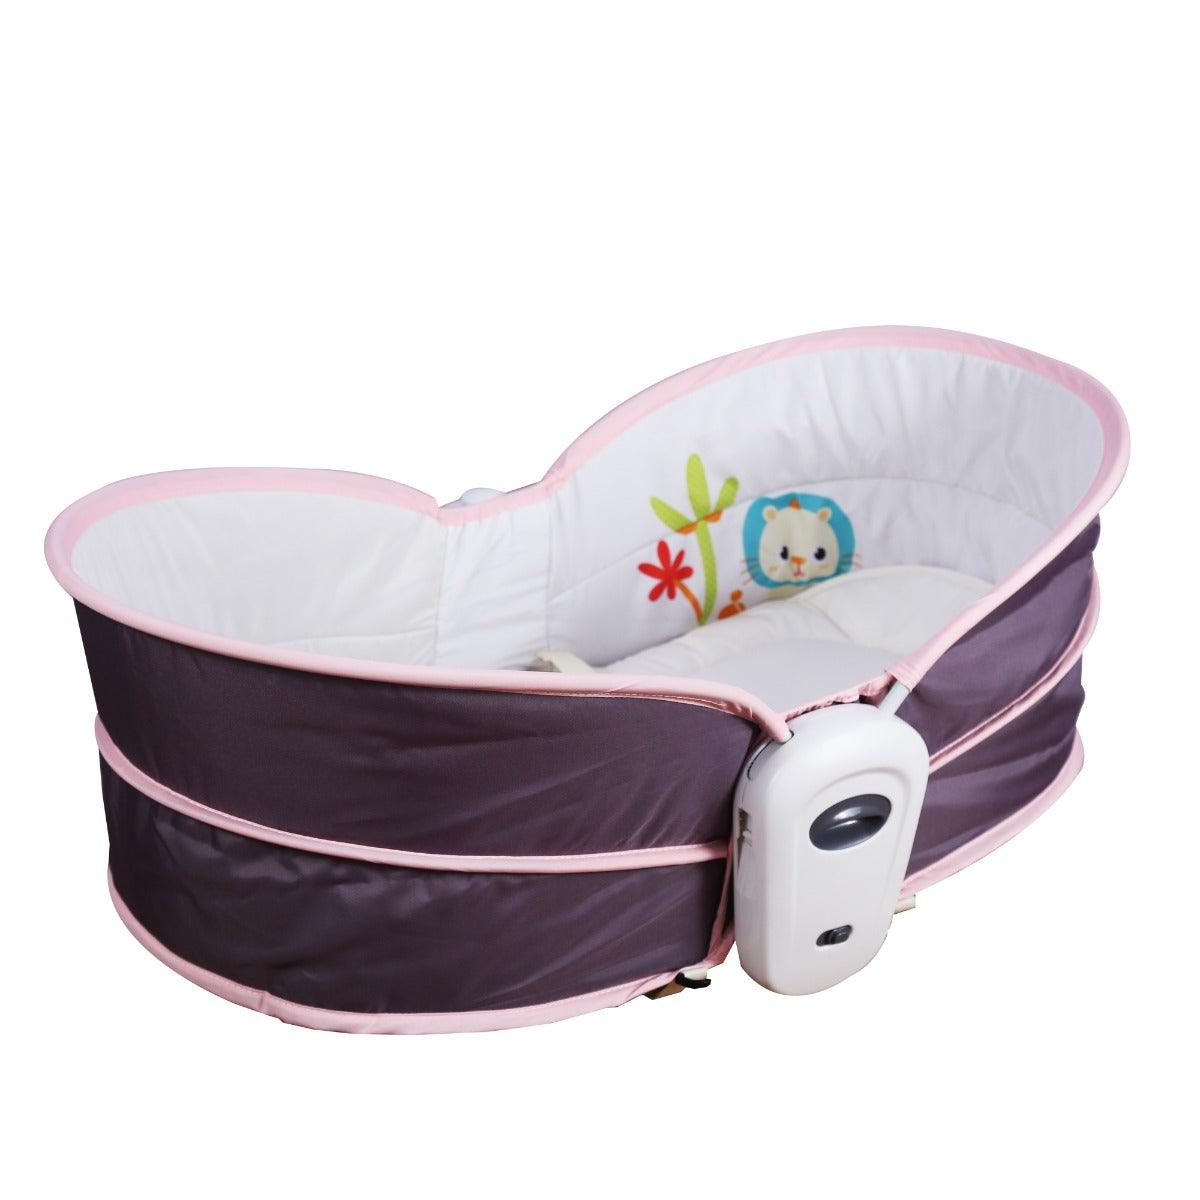 Mastela 5 In 1 Rocker & Bassinet Pink - For Ages 0-4 Years